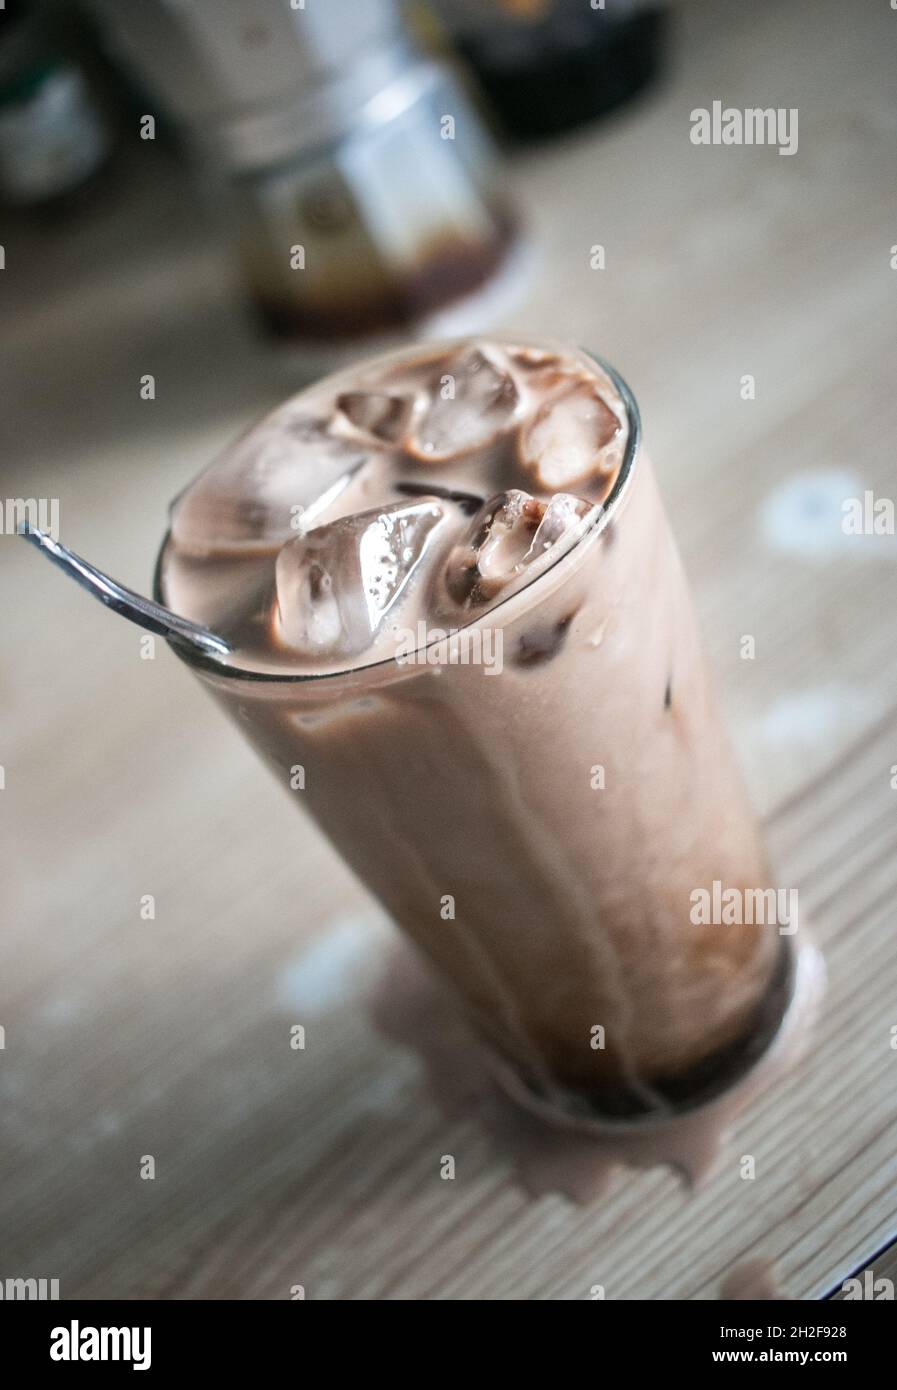 Overflowing, stirred Iced Coffee on Kitchen counter Stock Photo